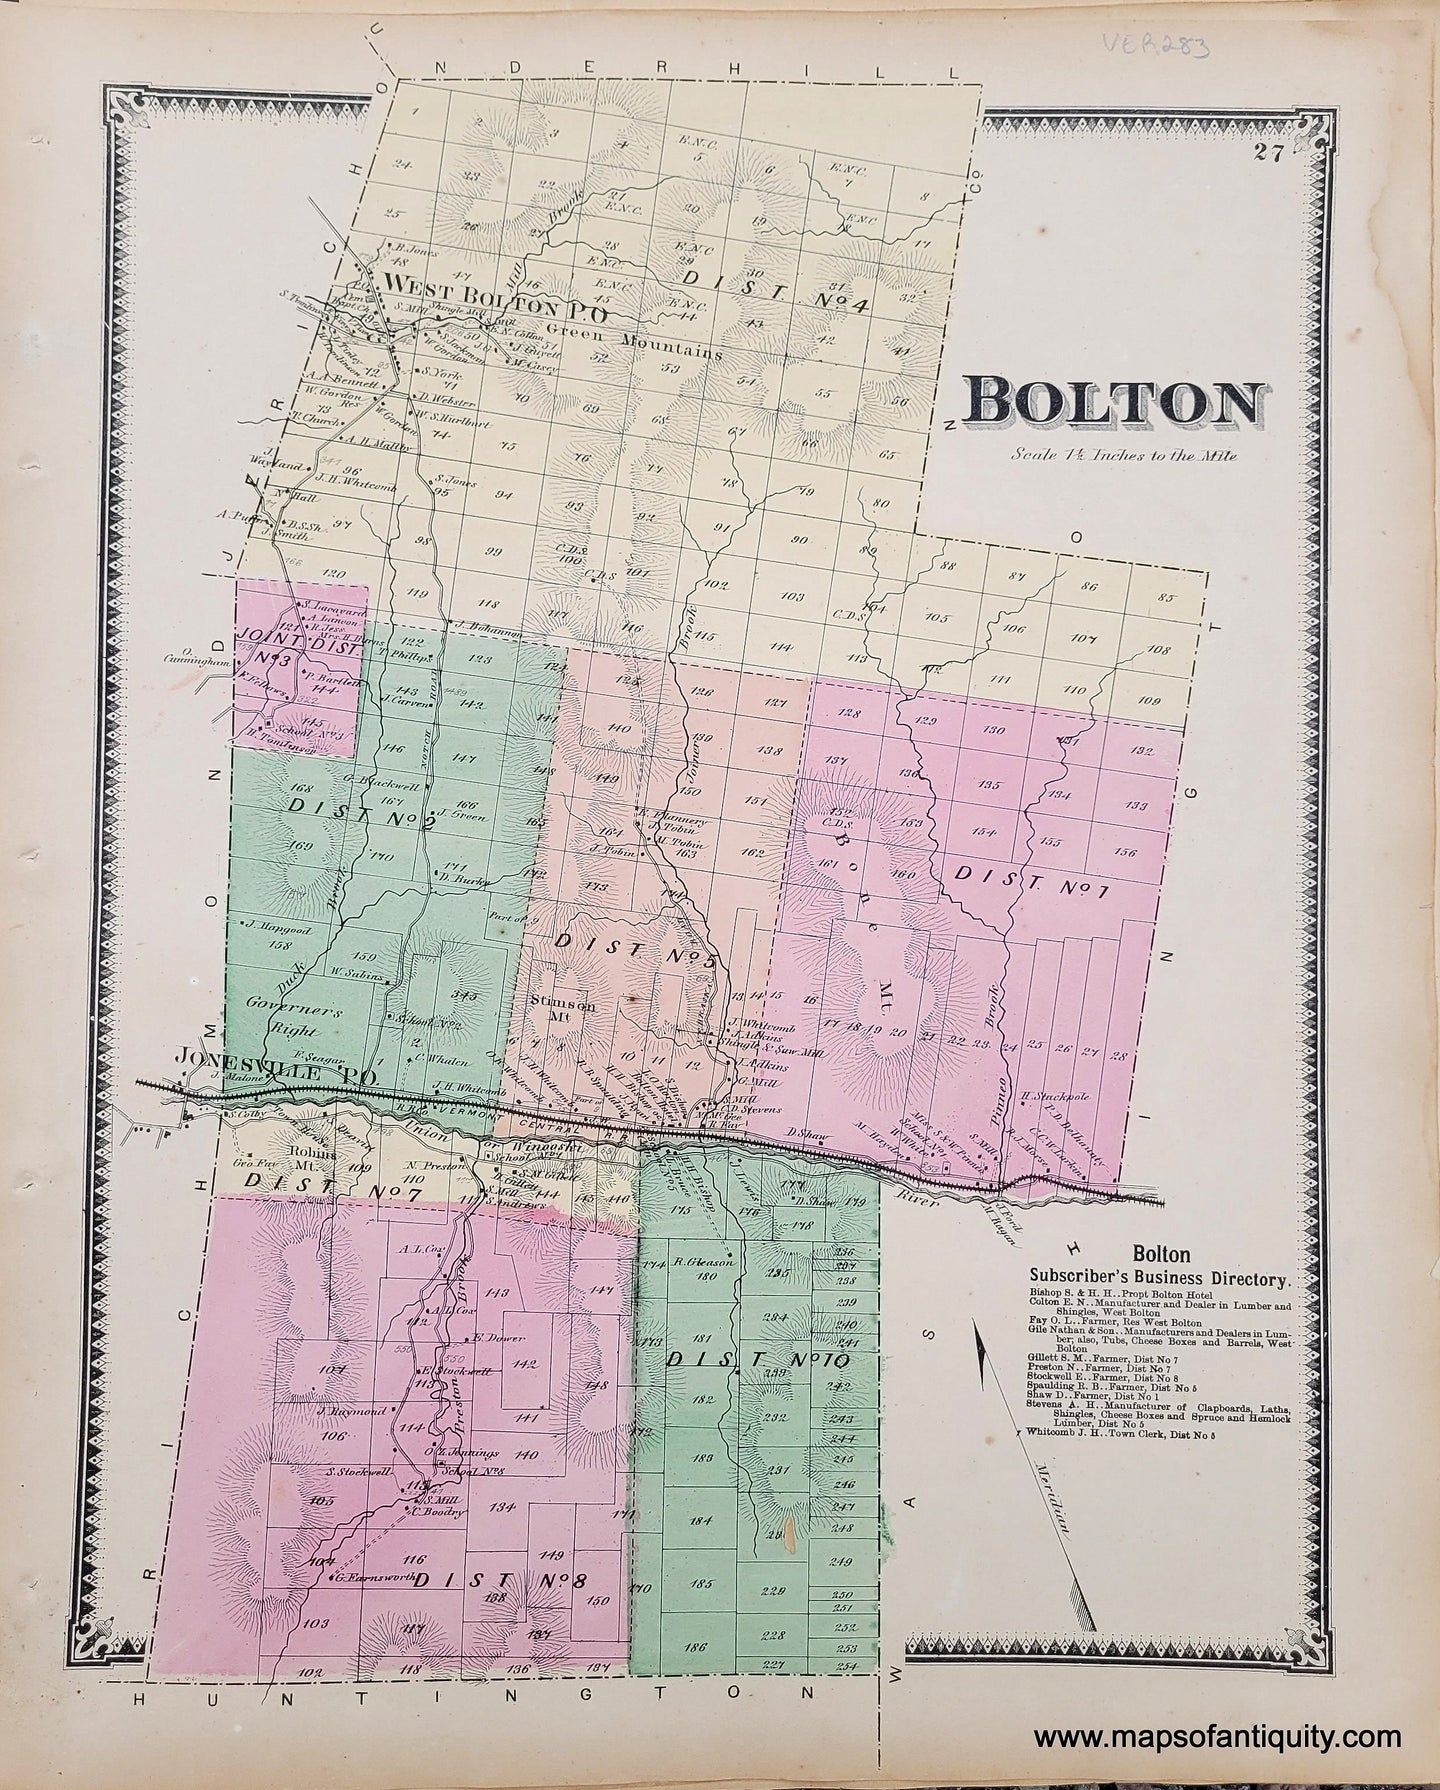 Genuine-Antique-Hand-colored-Map-Bolton-VT--1869-Beers-Ellis-Soule-Maps-Of-Antiquity